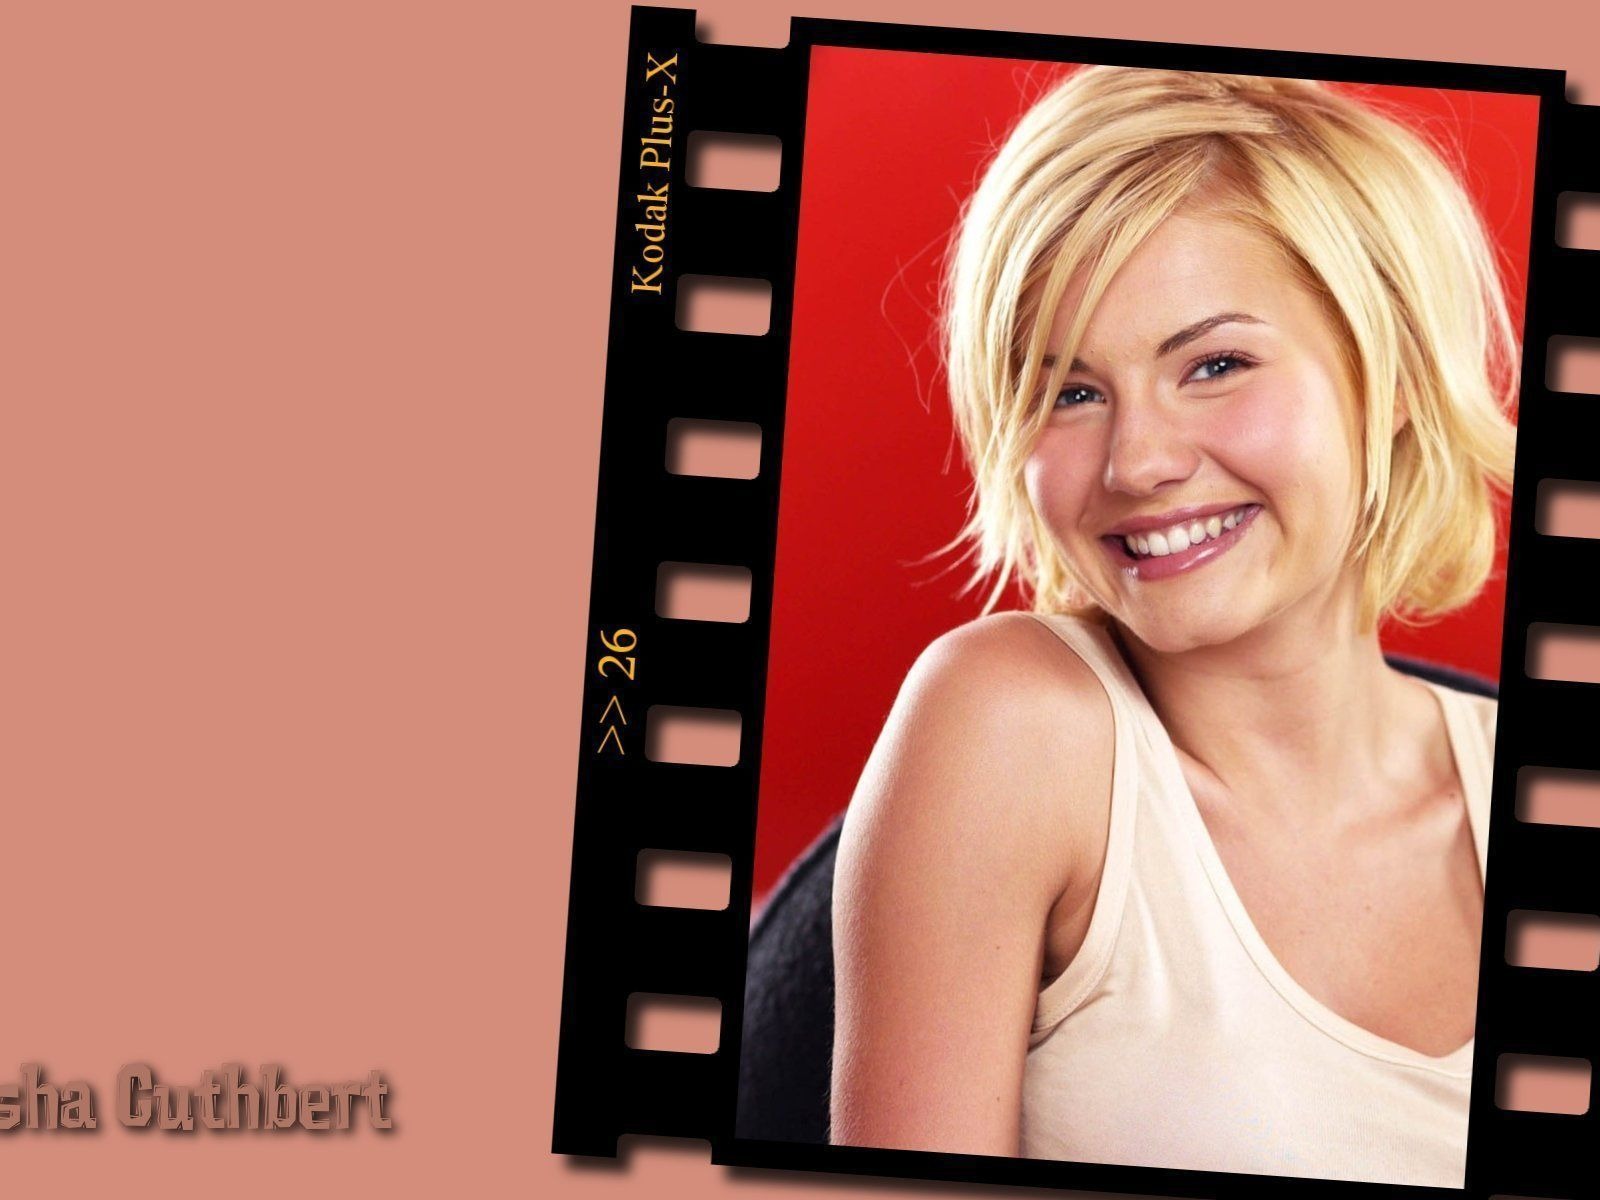 Elisha Cuthbert #014 - 1600x1200 Wallpapers Pictures Photos Images